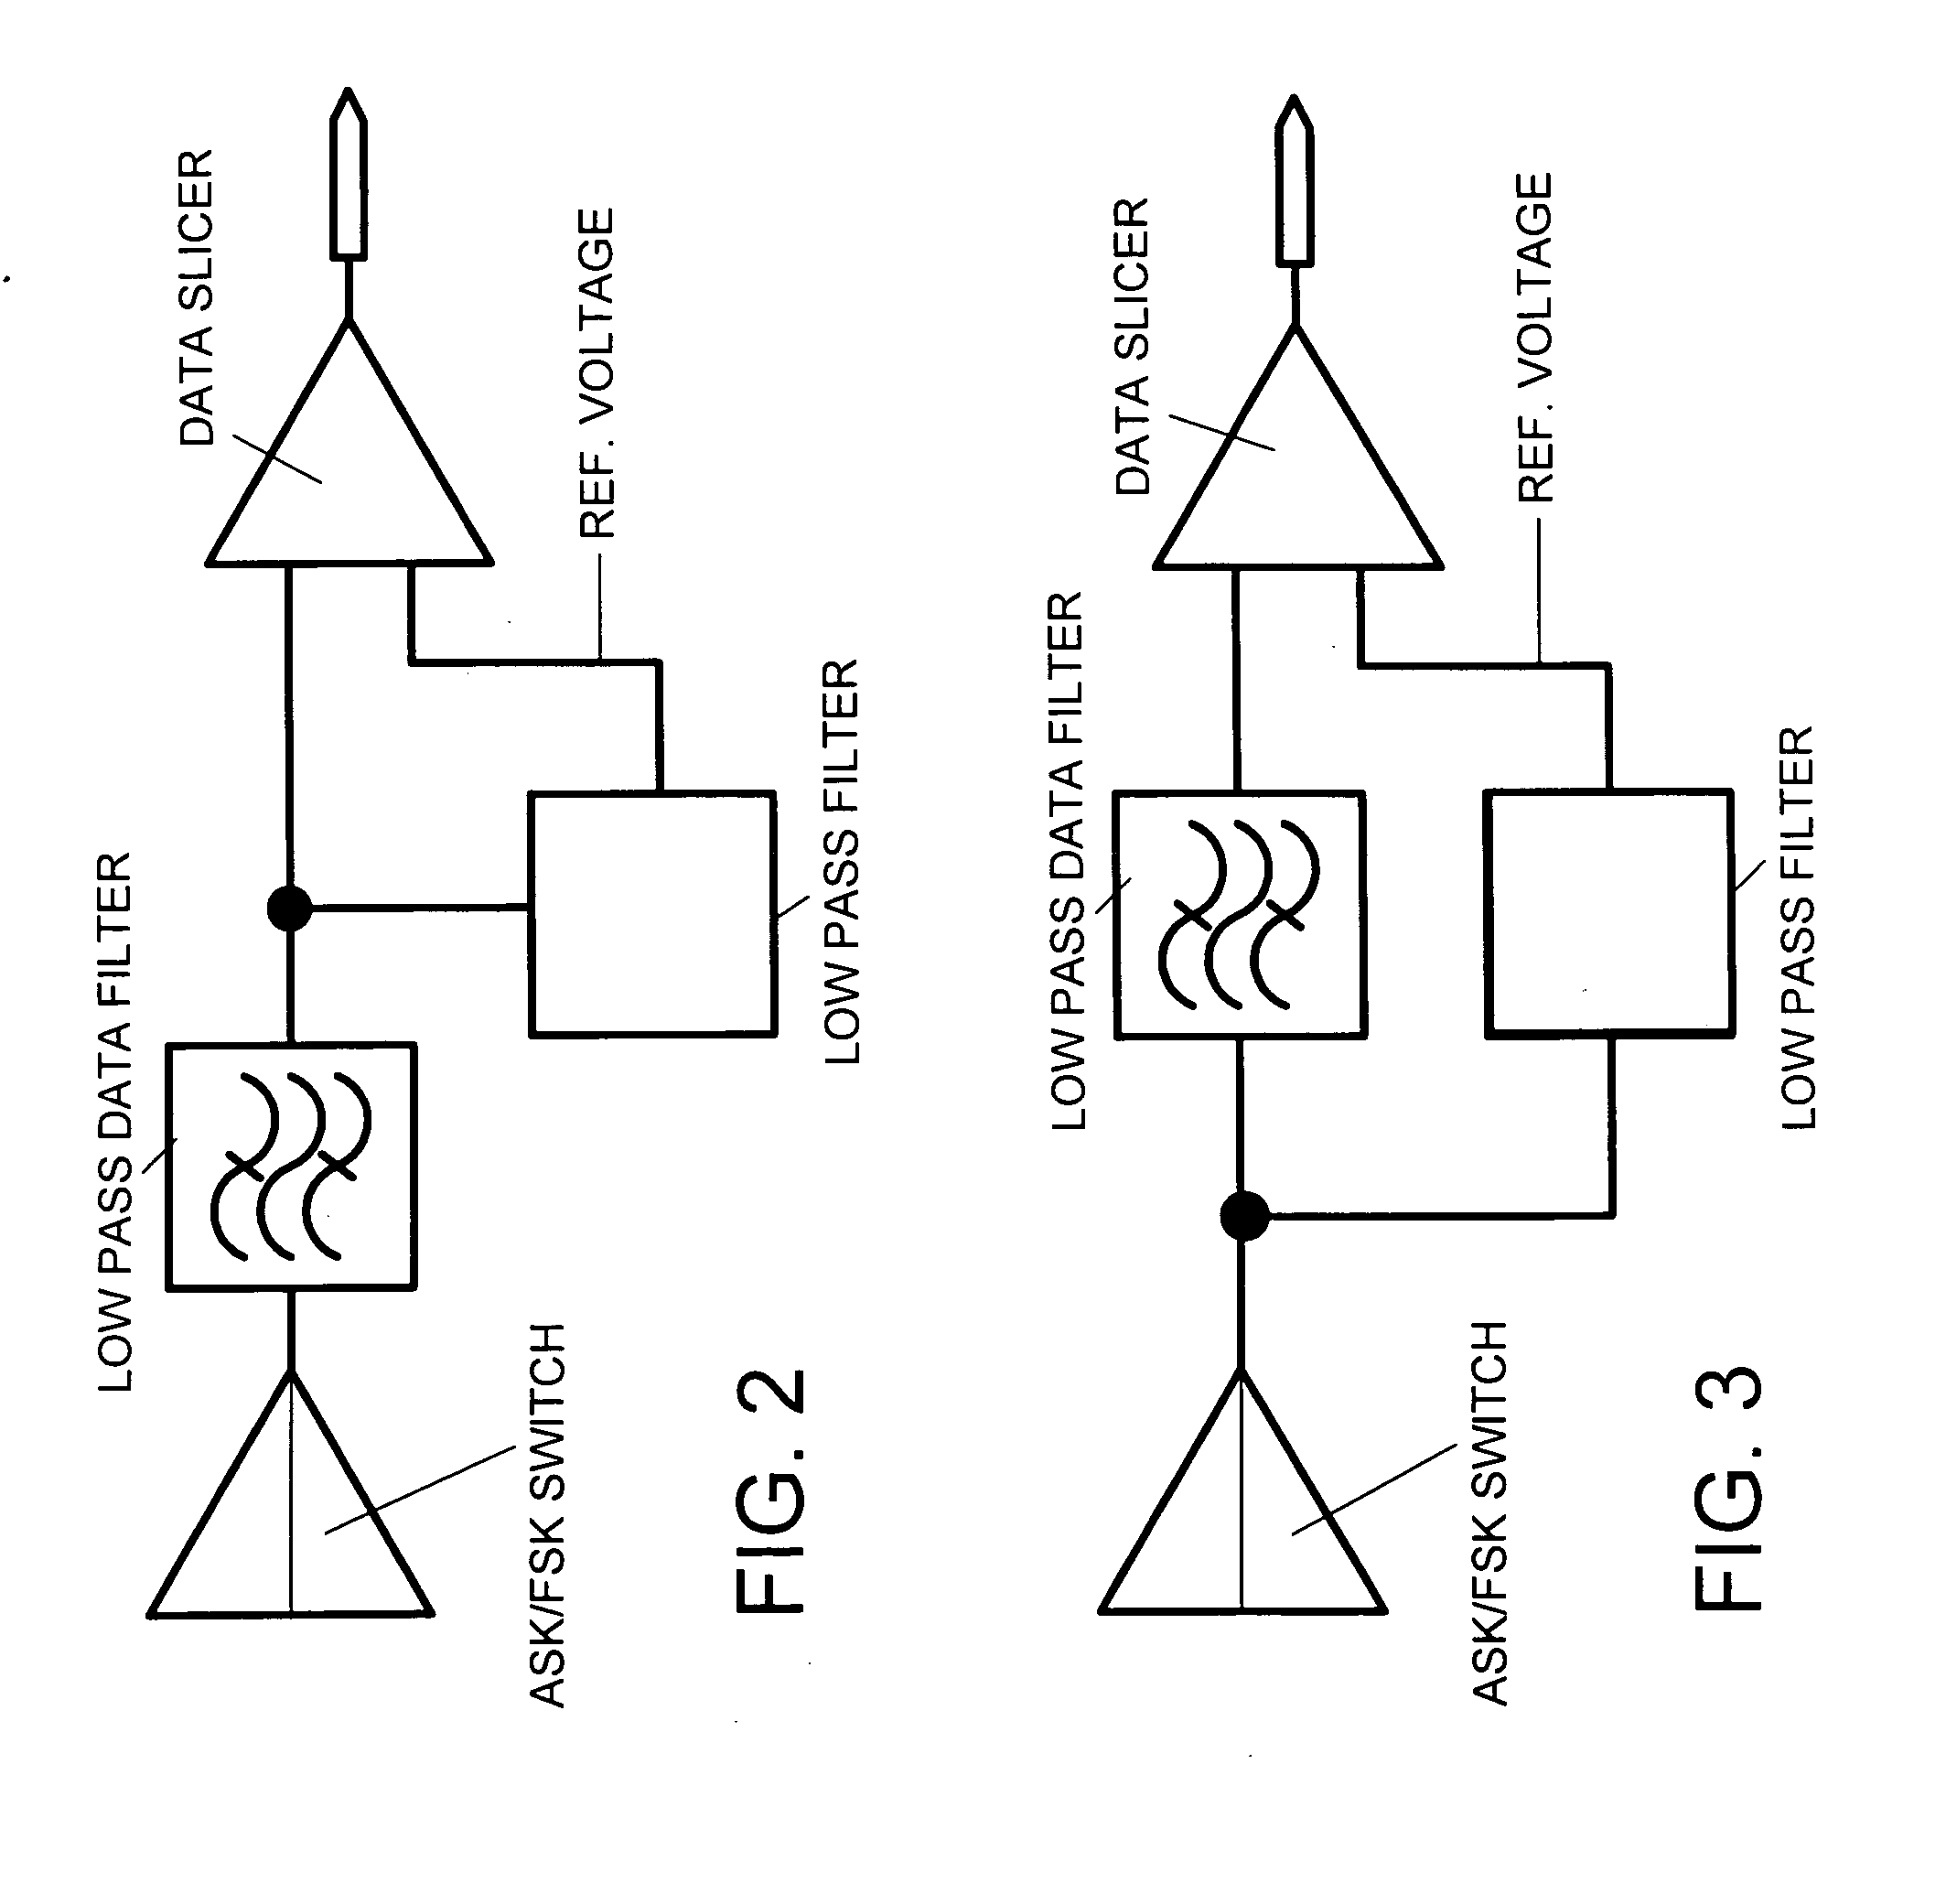 IF derived data slicer reference voltage circuit